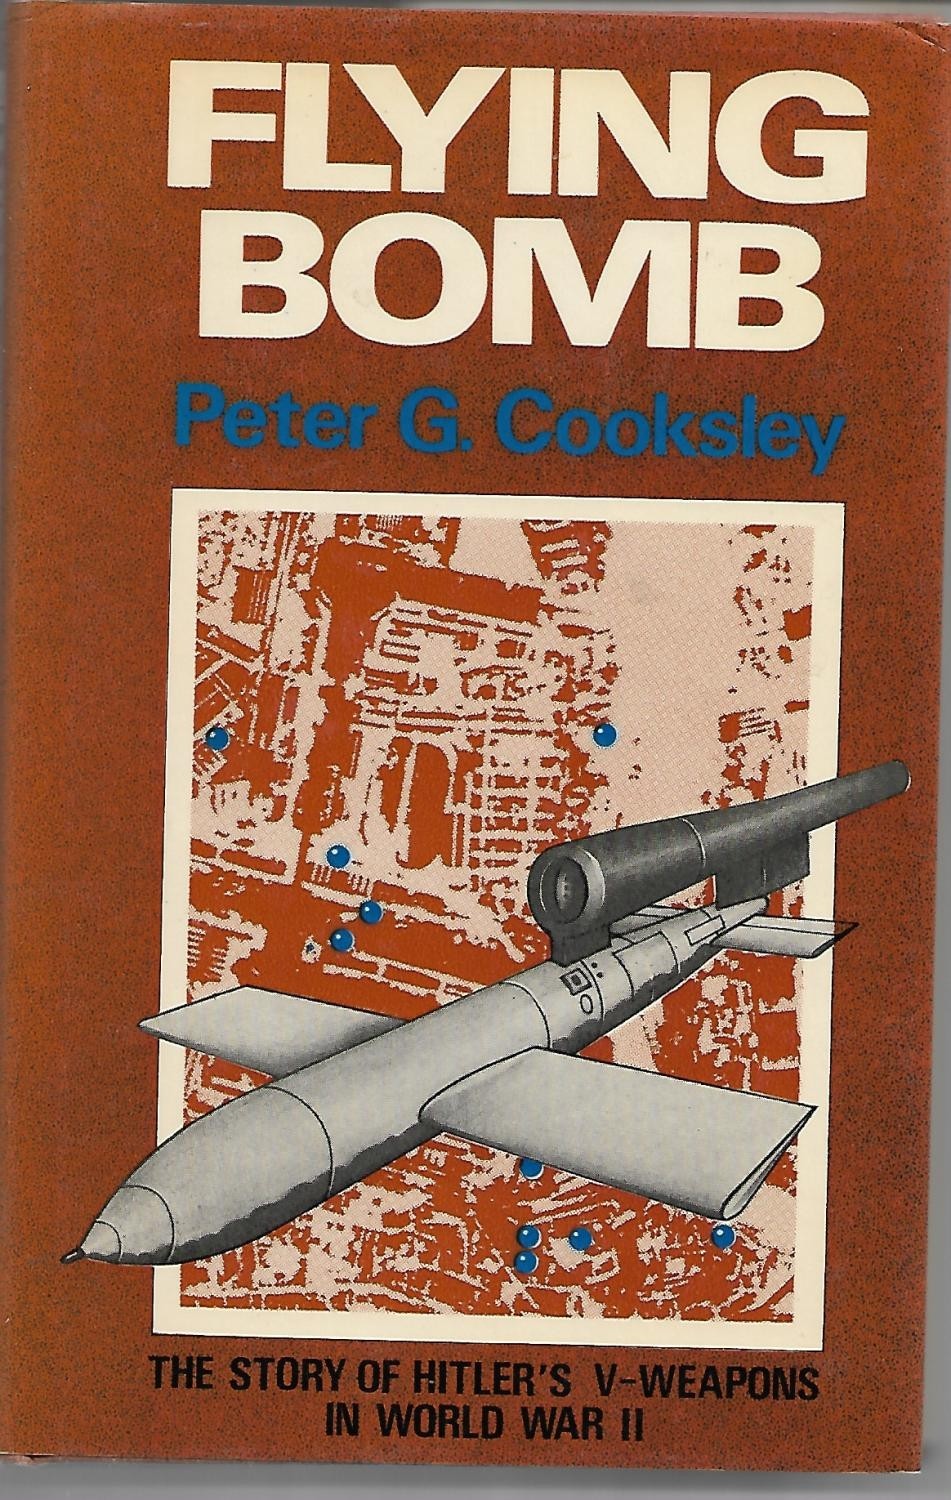 Flying bomb by Peter G. Cooksley